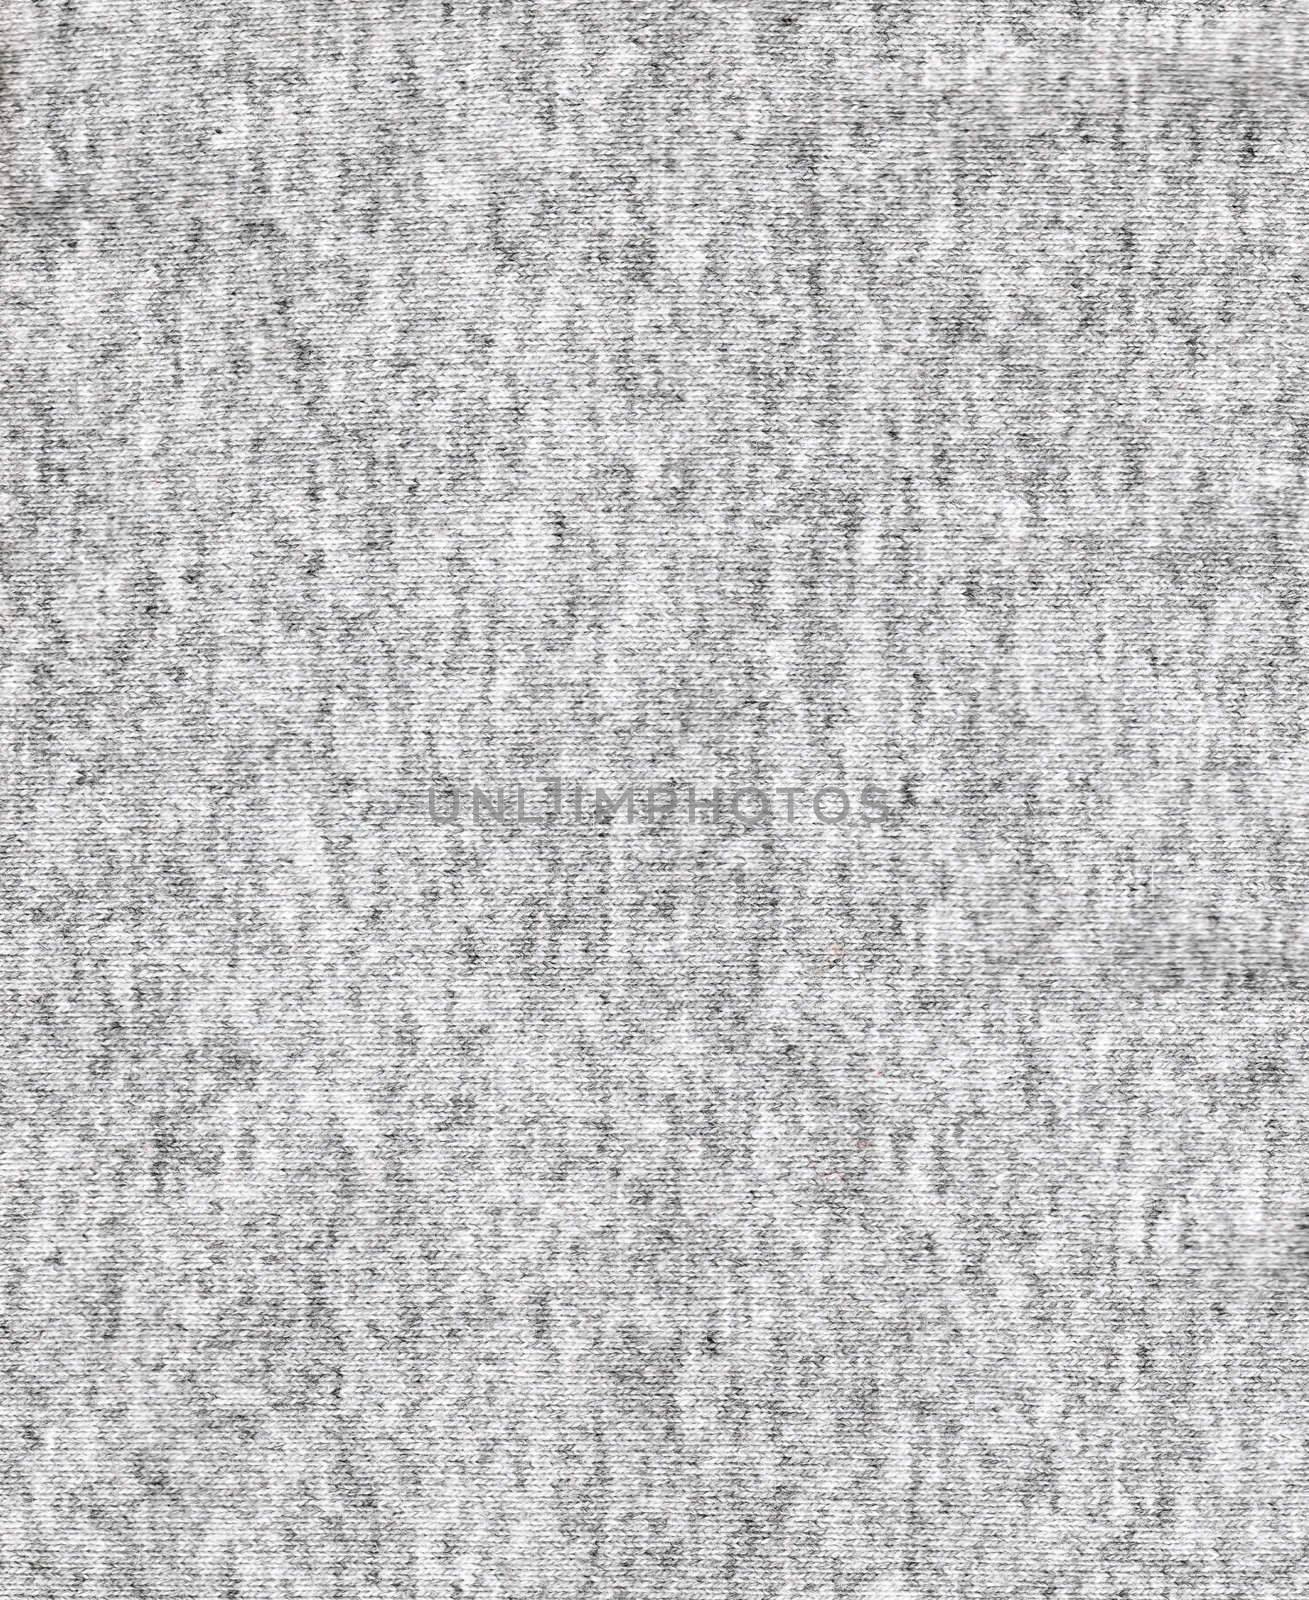 Woolen gray fabric by magraphics